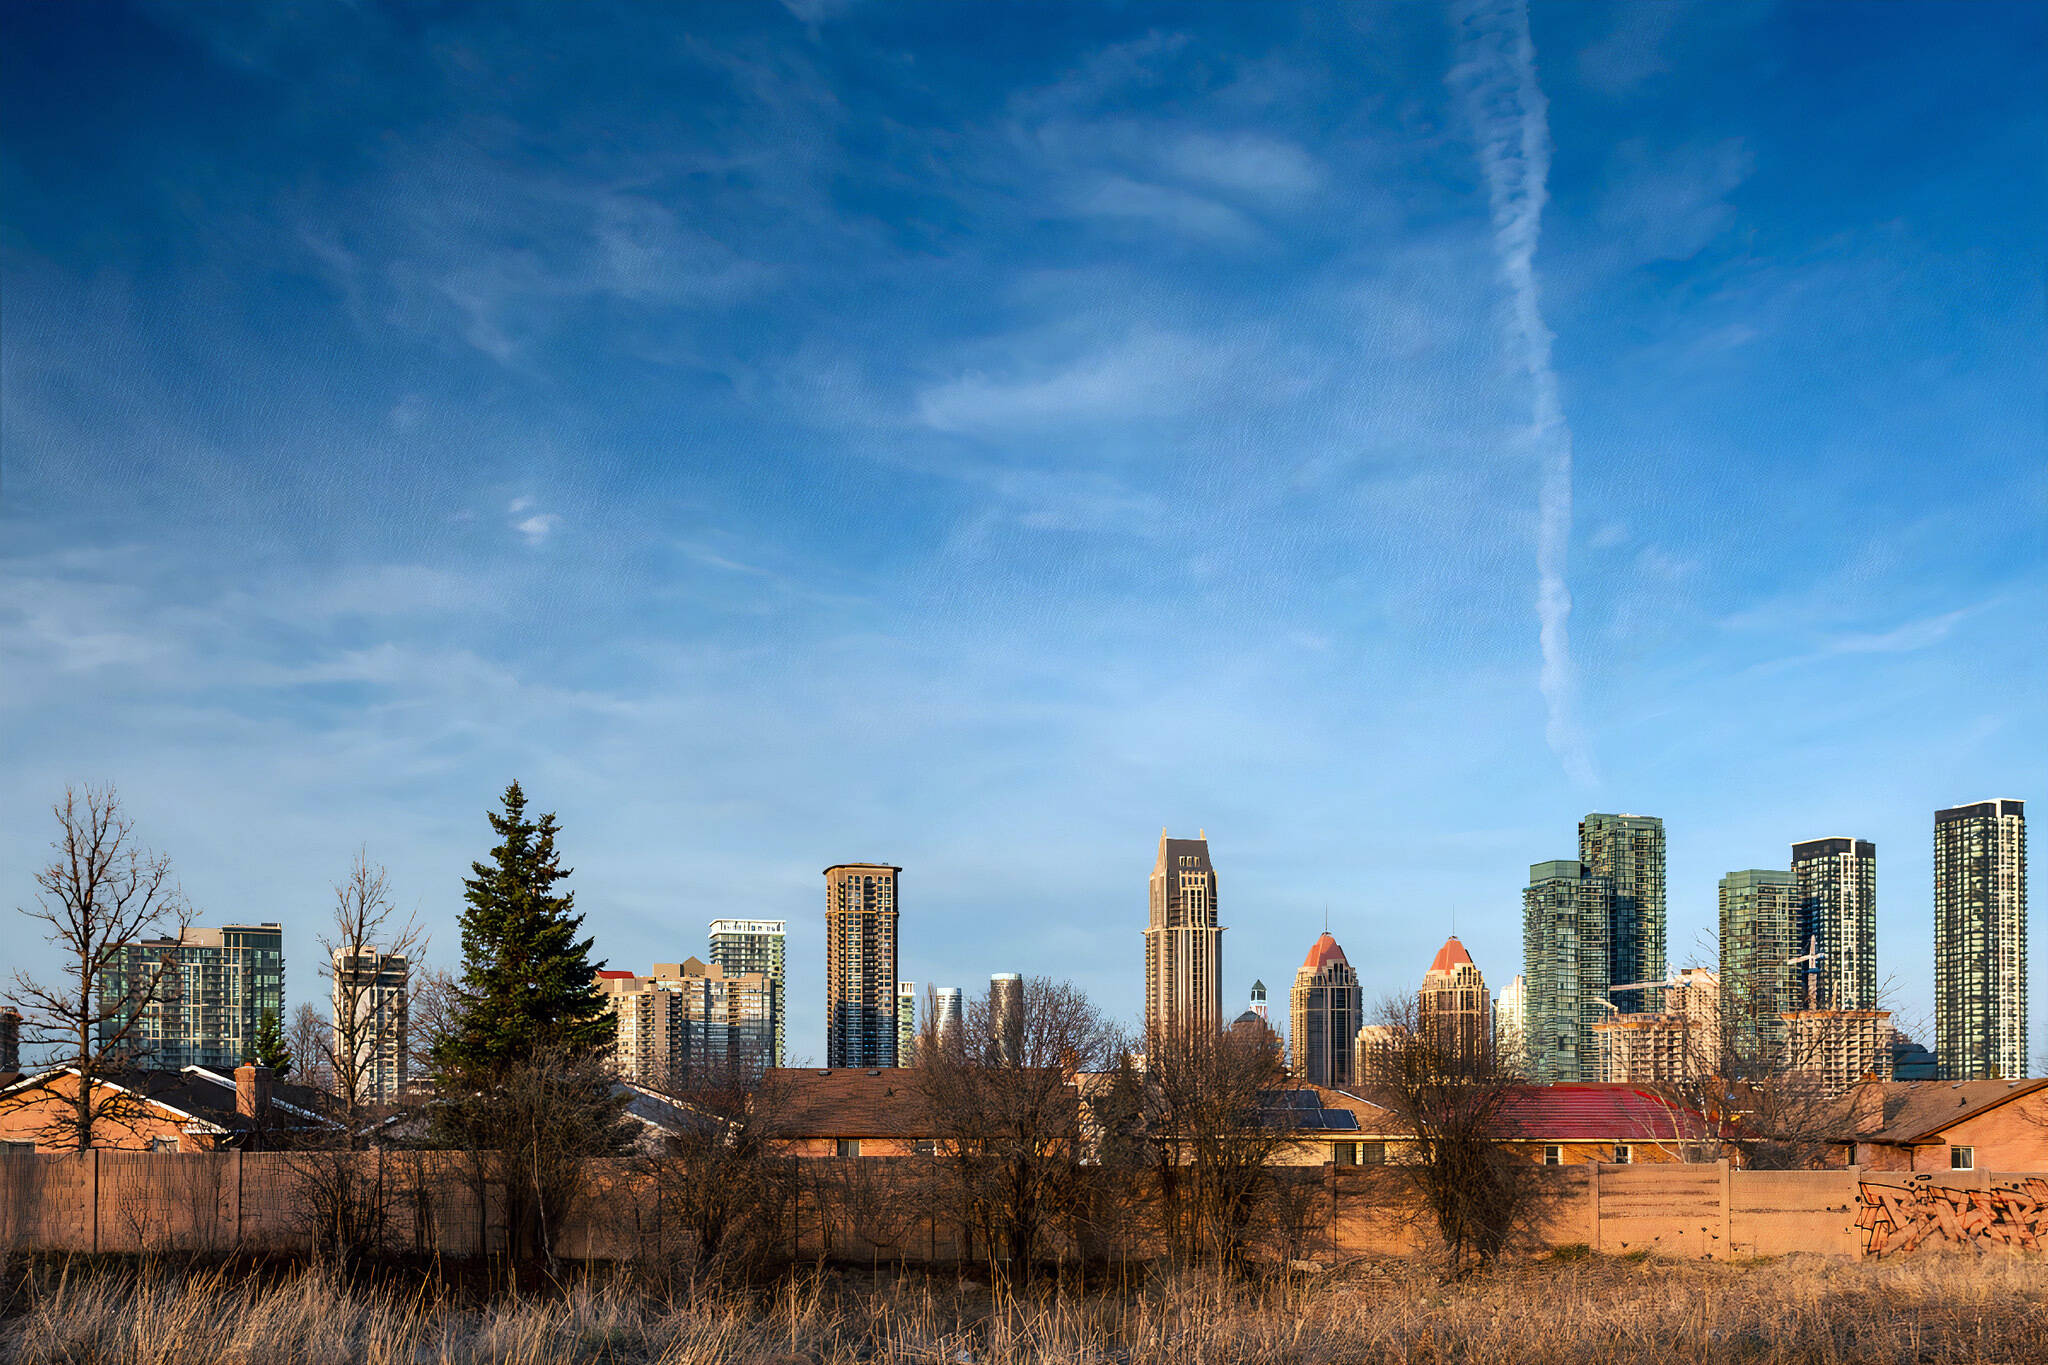 mississauga home prices